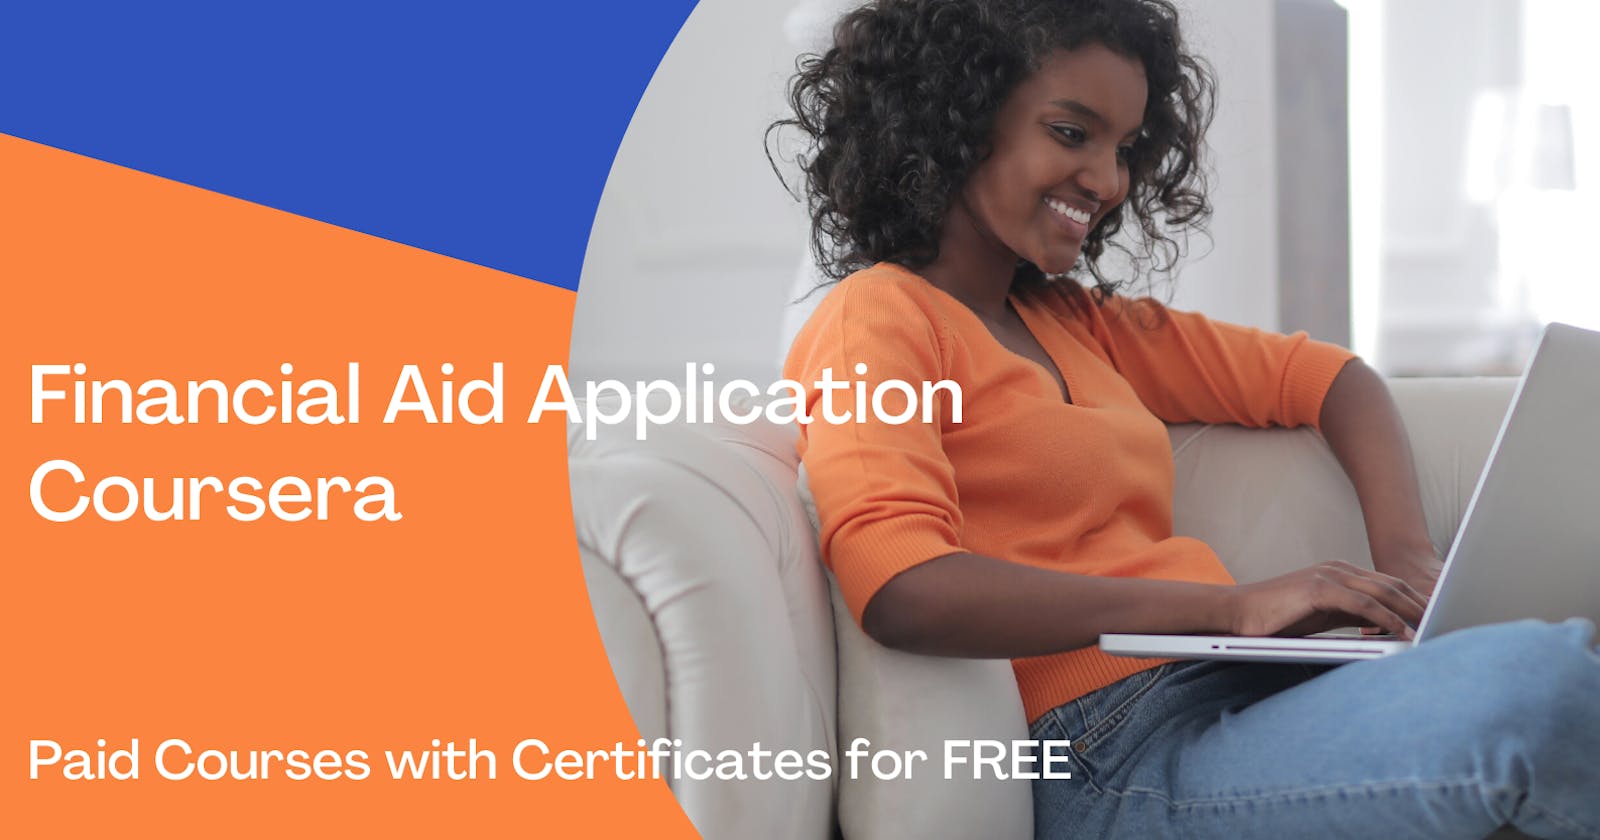 Writing Financial Aid Application | Get Coursera Courses for FREE with Certificates.